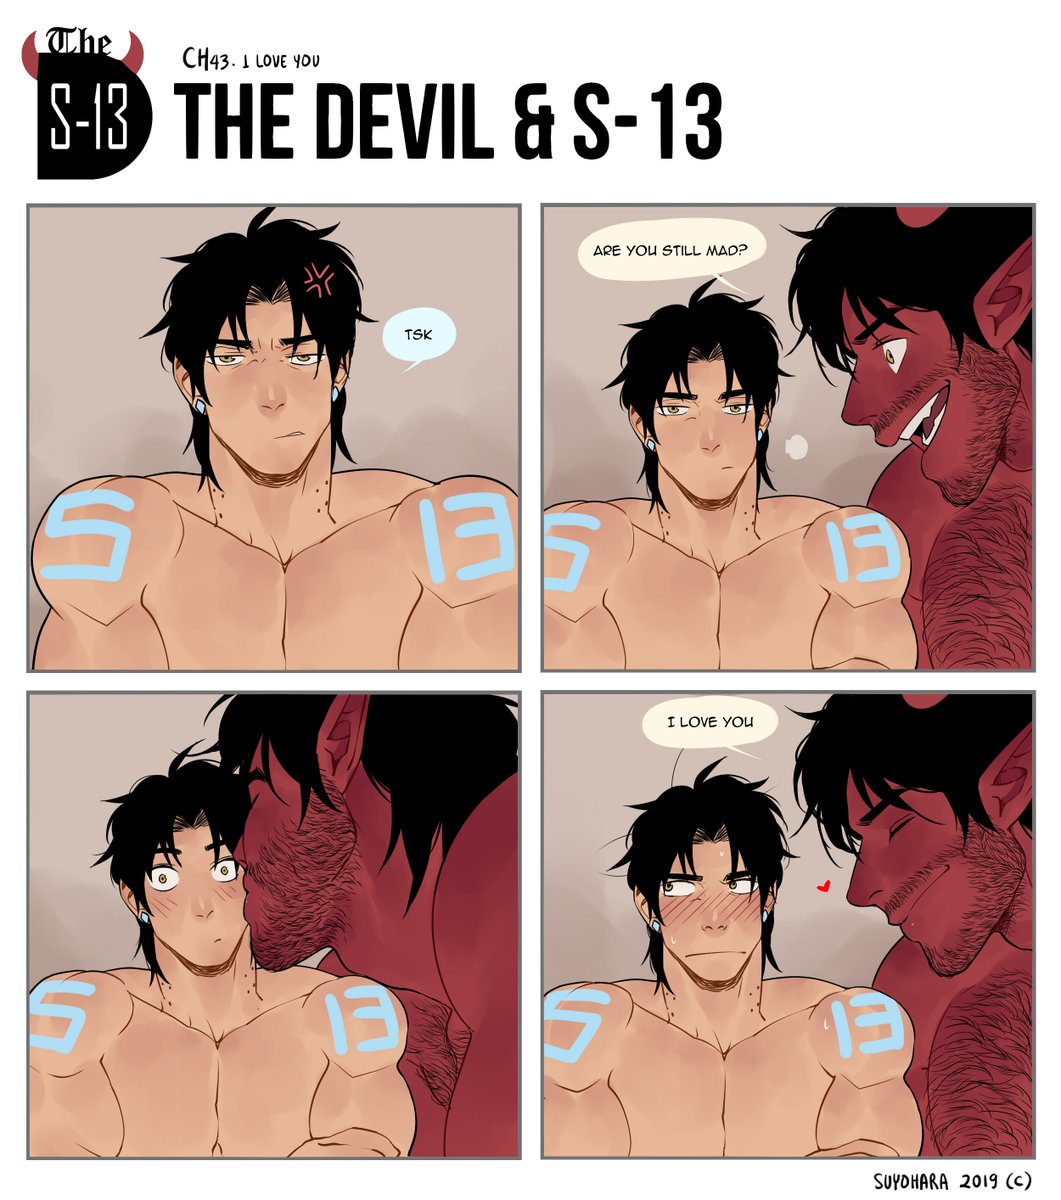 The Devil and S-13.